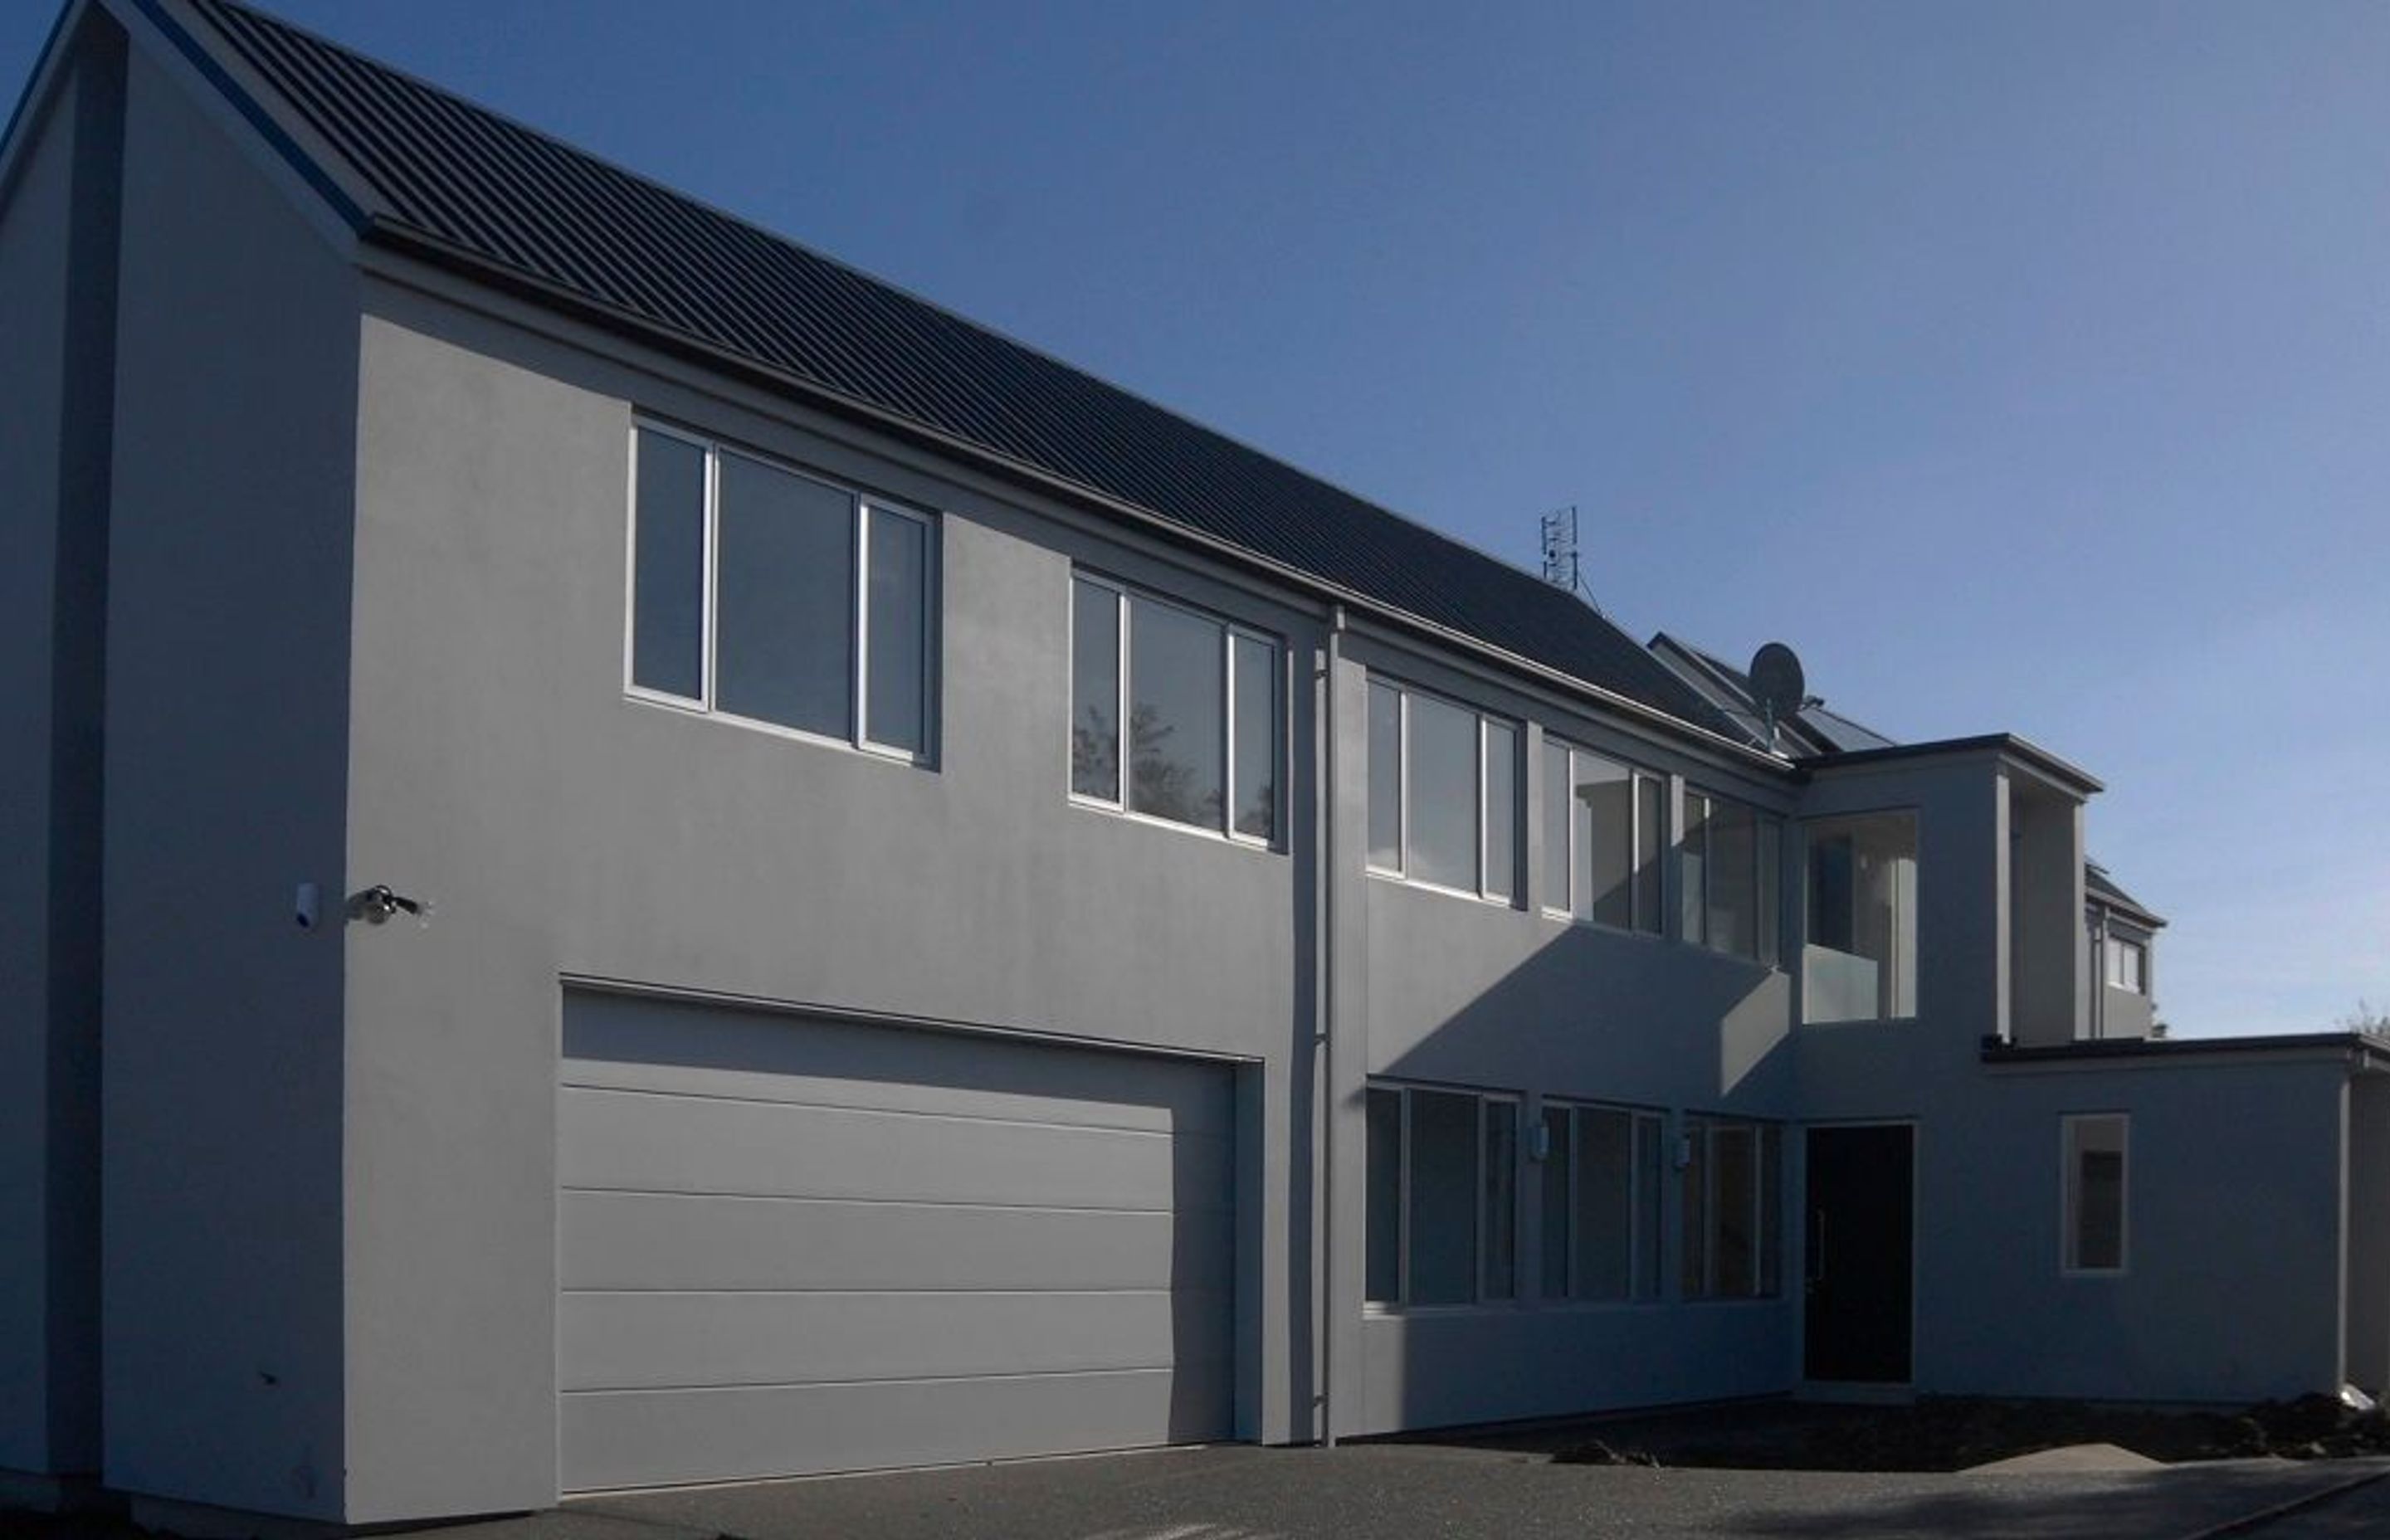 New Zealand’s first two-storey house built on TC3 land